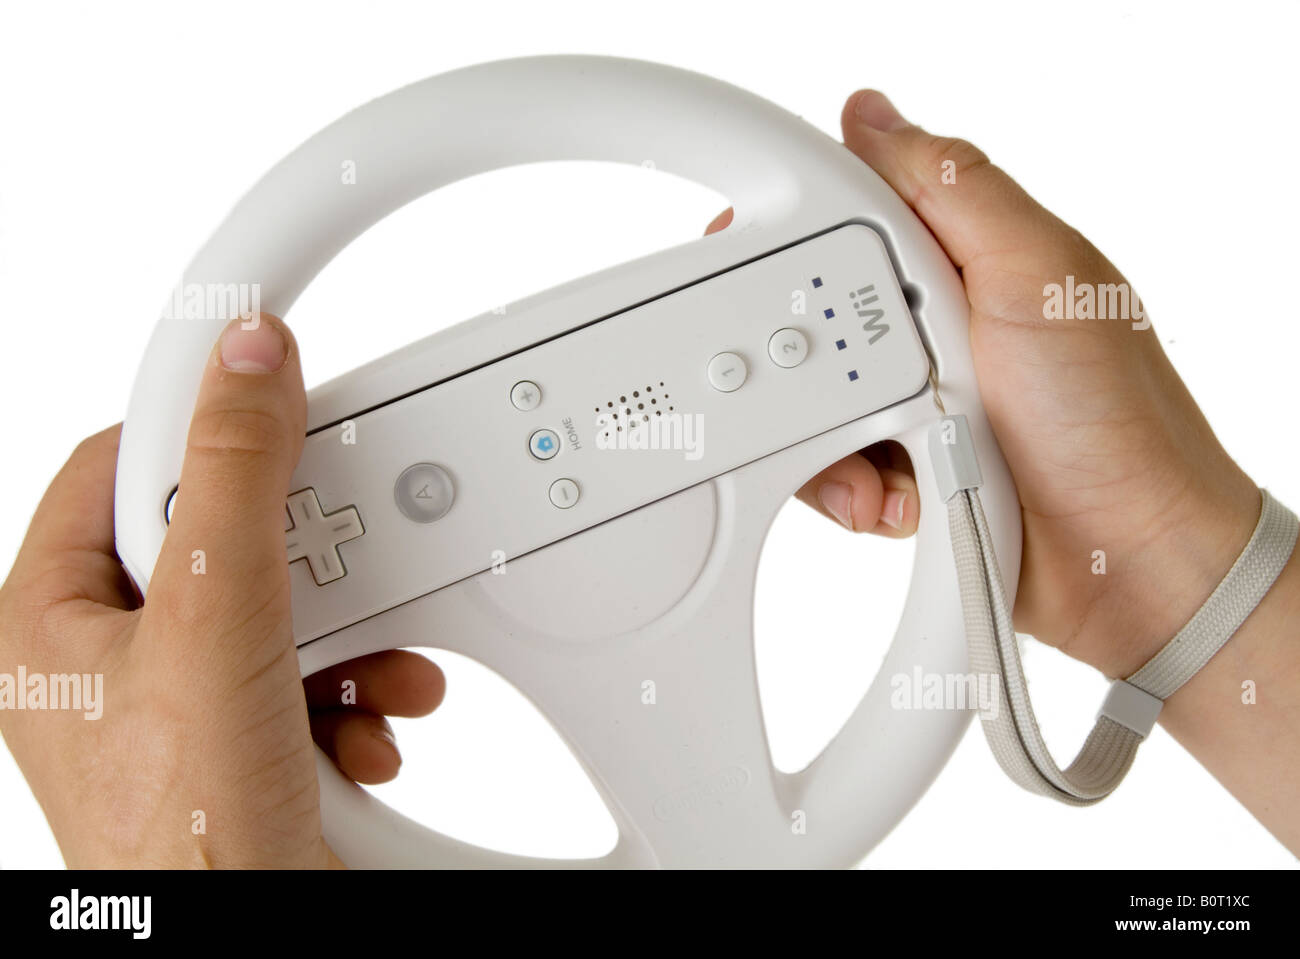 nintendo wii steering wheel mario kart car racing game accessory toy  computer game video drive driving driver expression handset Stock Photo -  Alamy